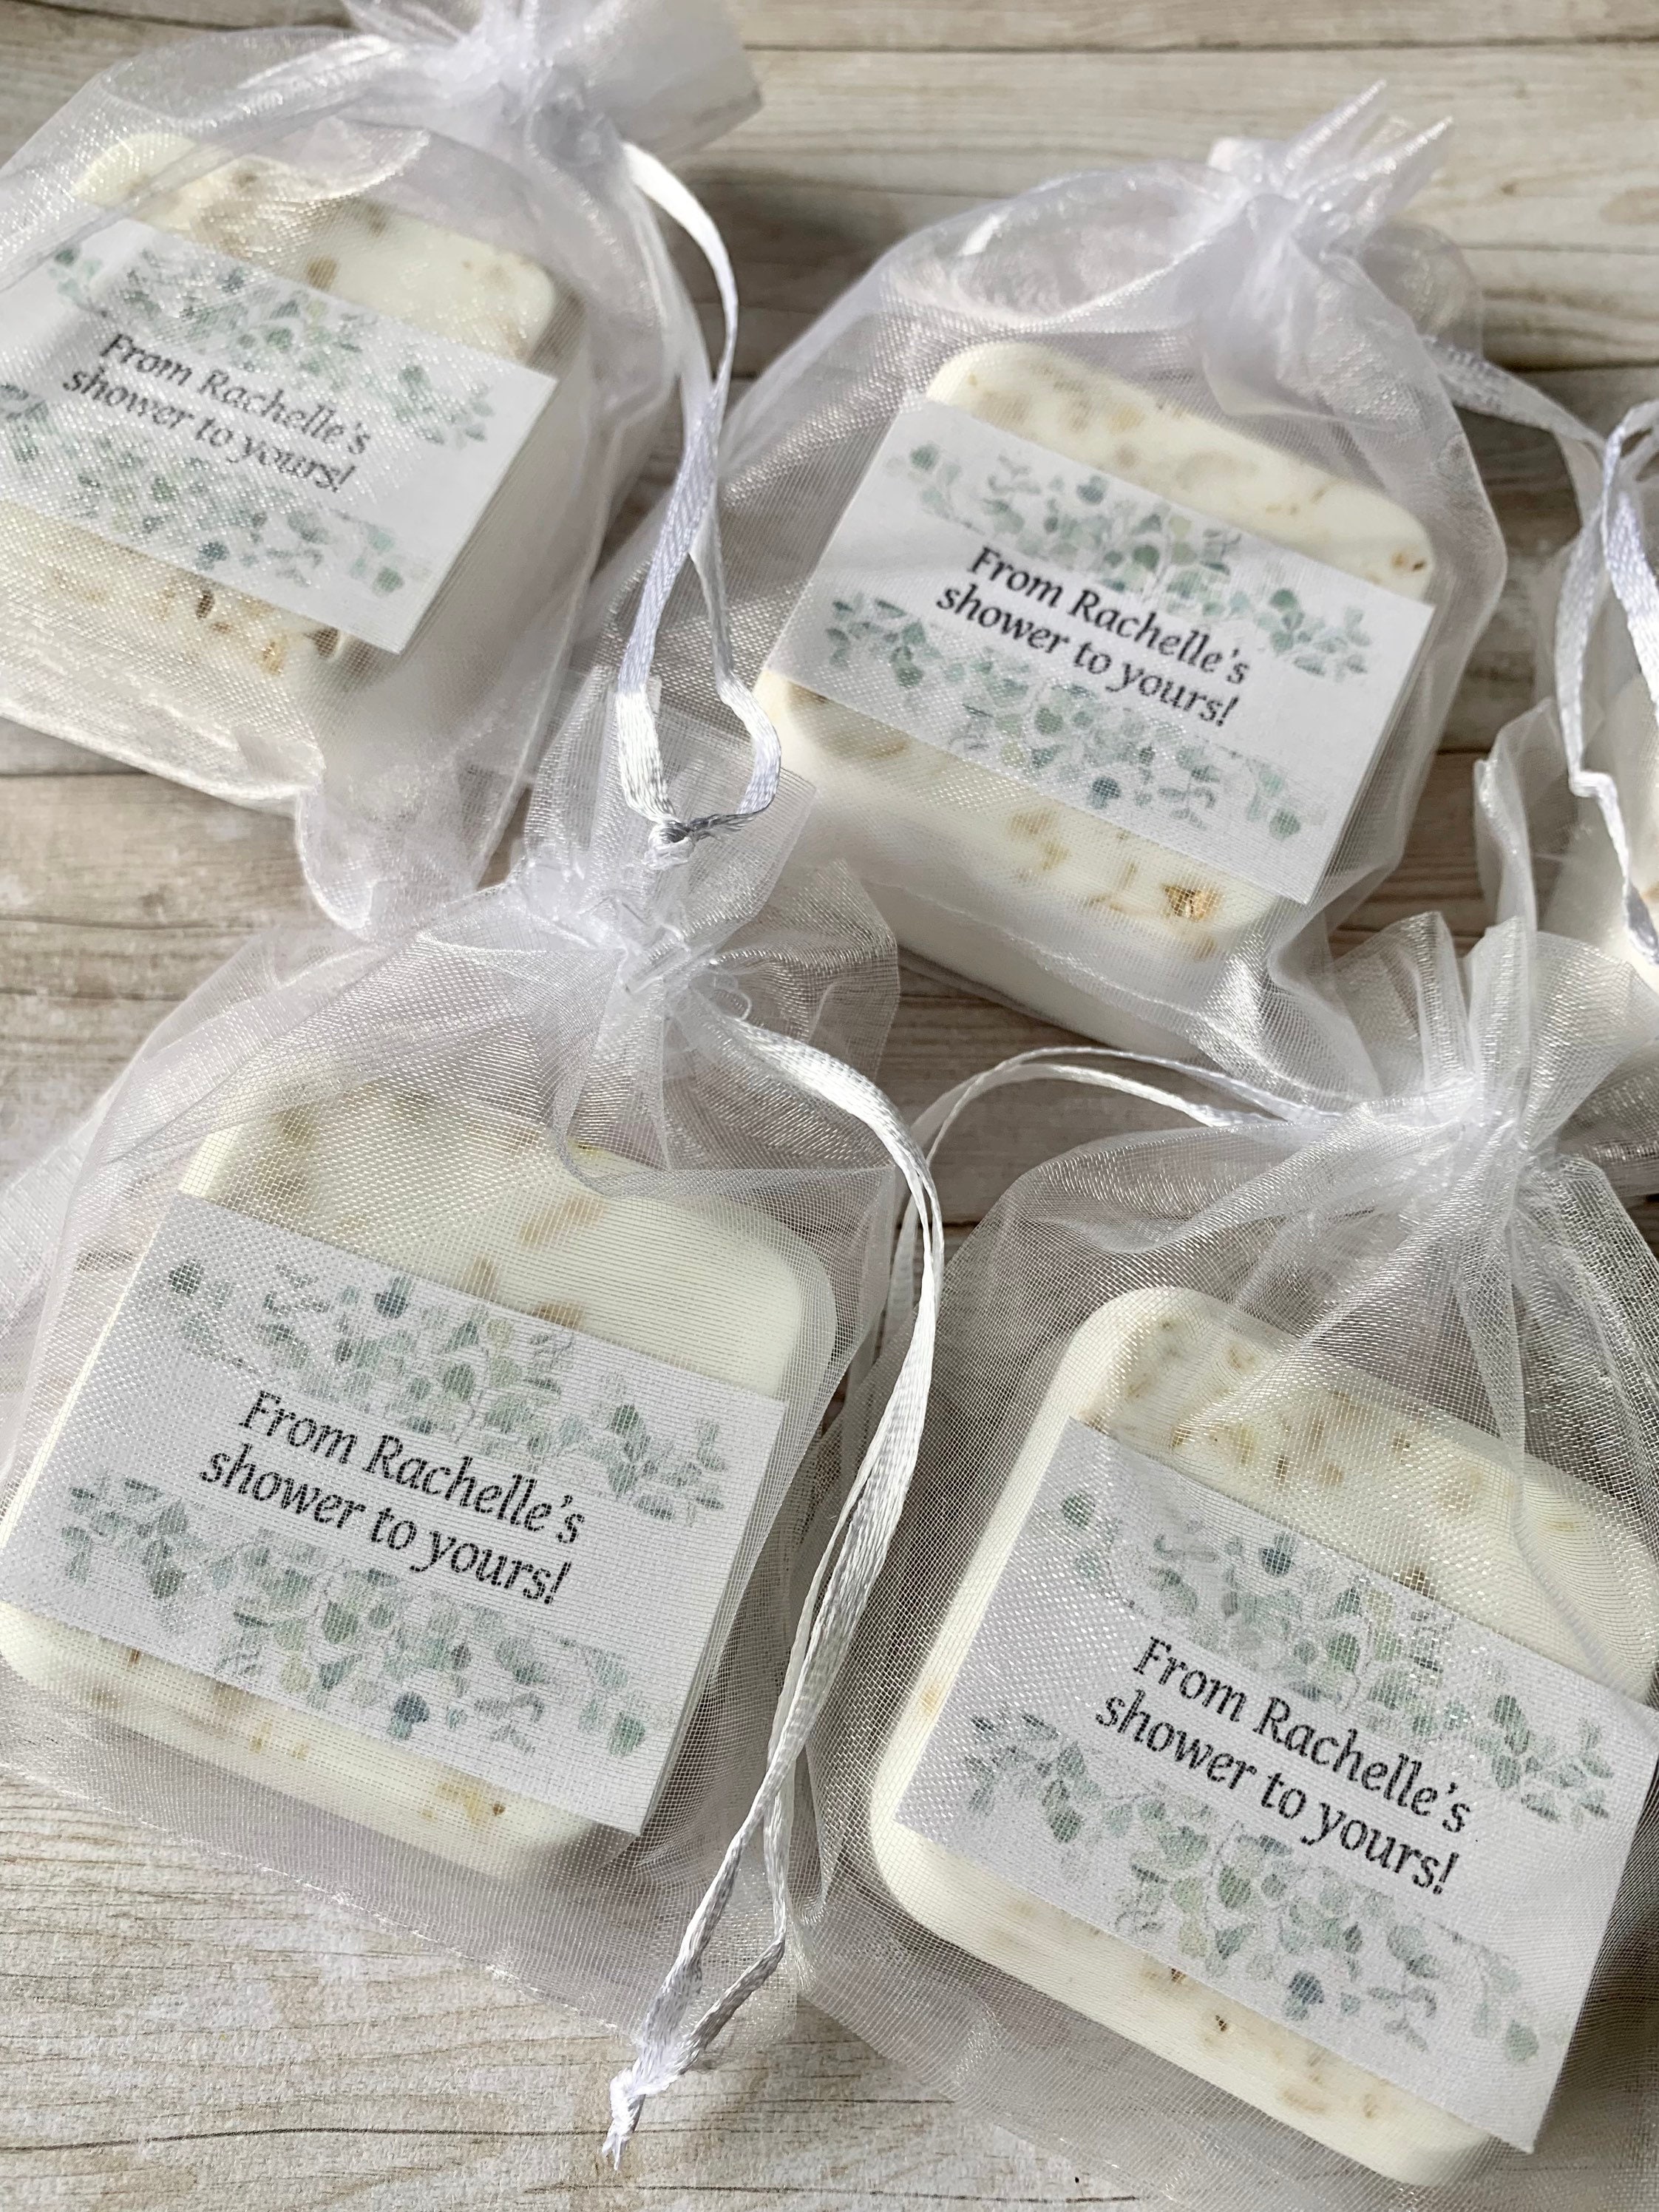 50 Full Size Goat Milk Soap Wedding Favors , Bridal Favors , Birthday  Favors, Party Favors ,made in Maine, Shipping Included 